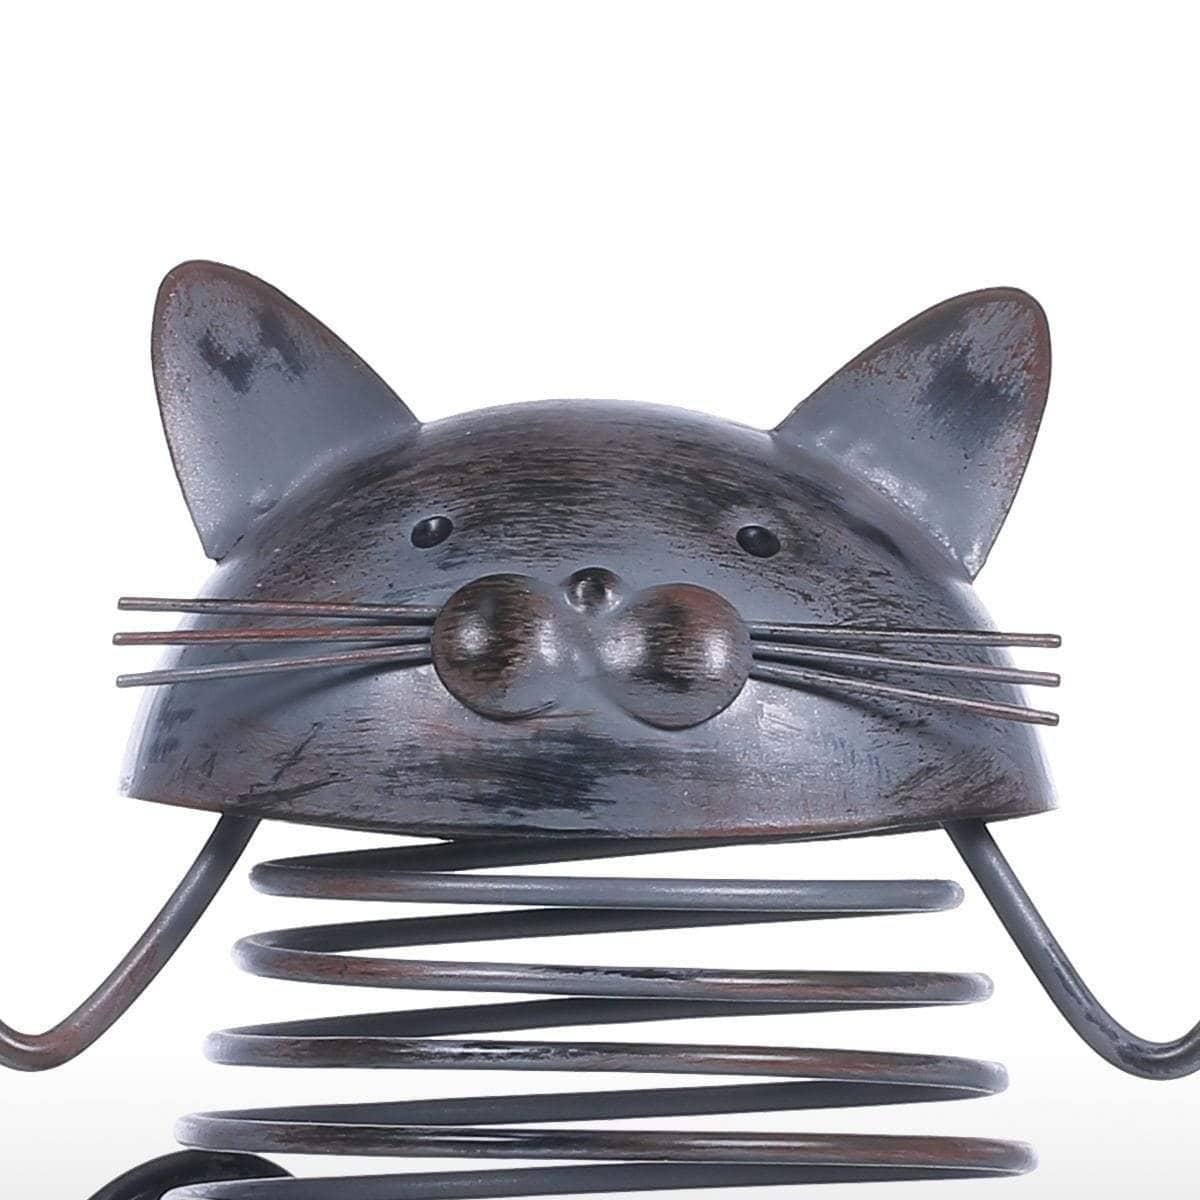 Whimsical Spring Cat Wine Bottle Holder Stand: Fun Home Decor